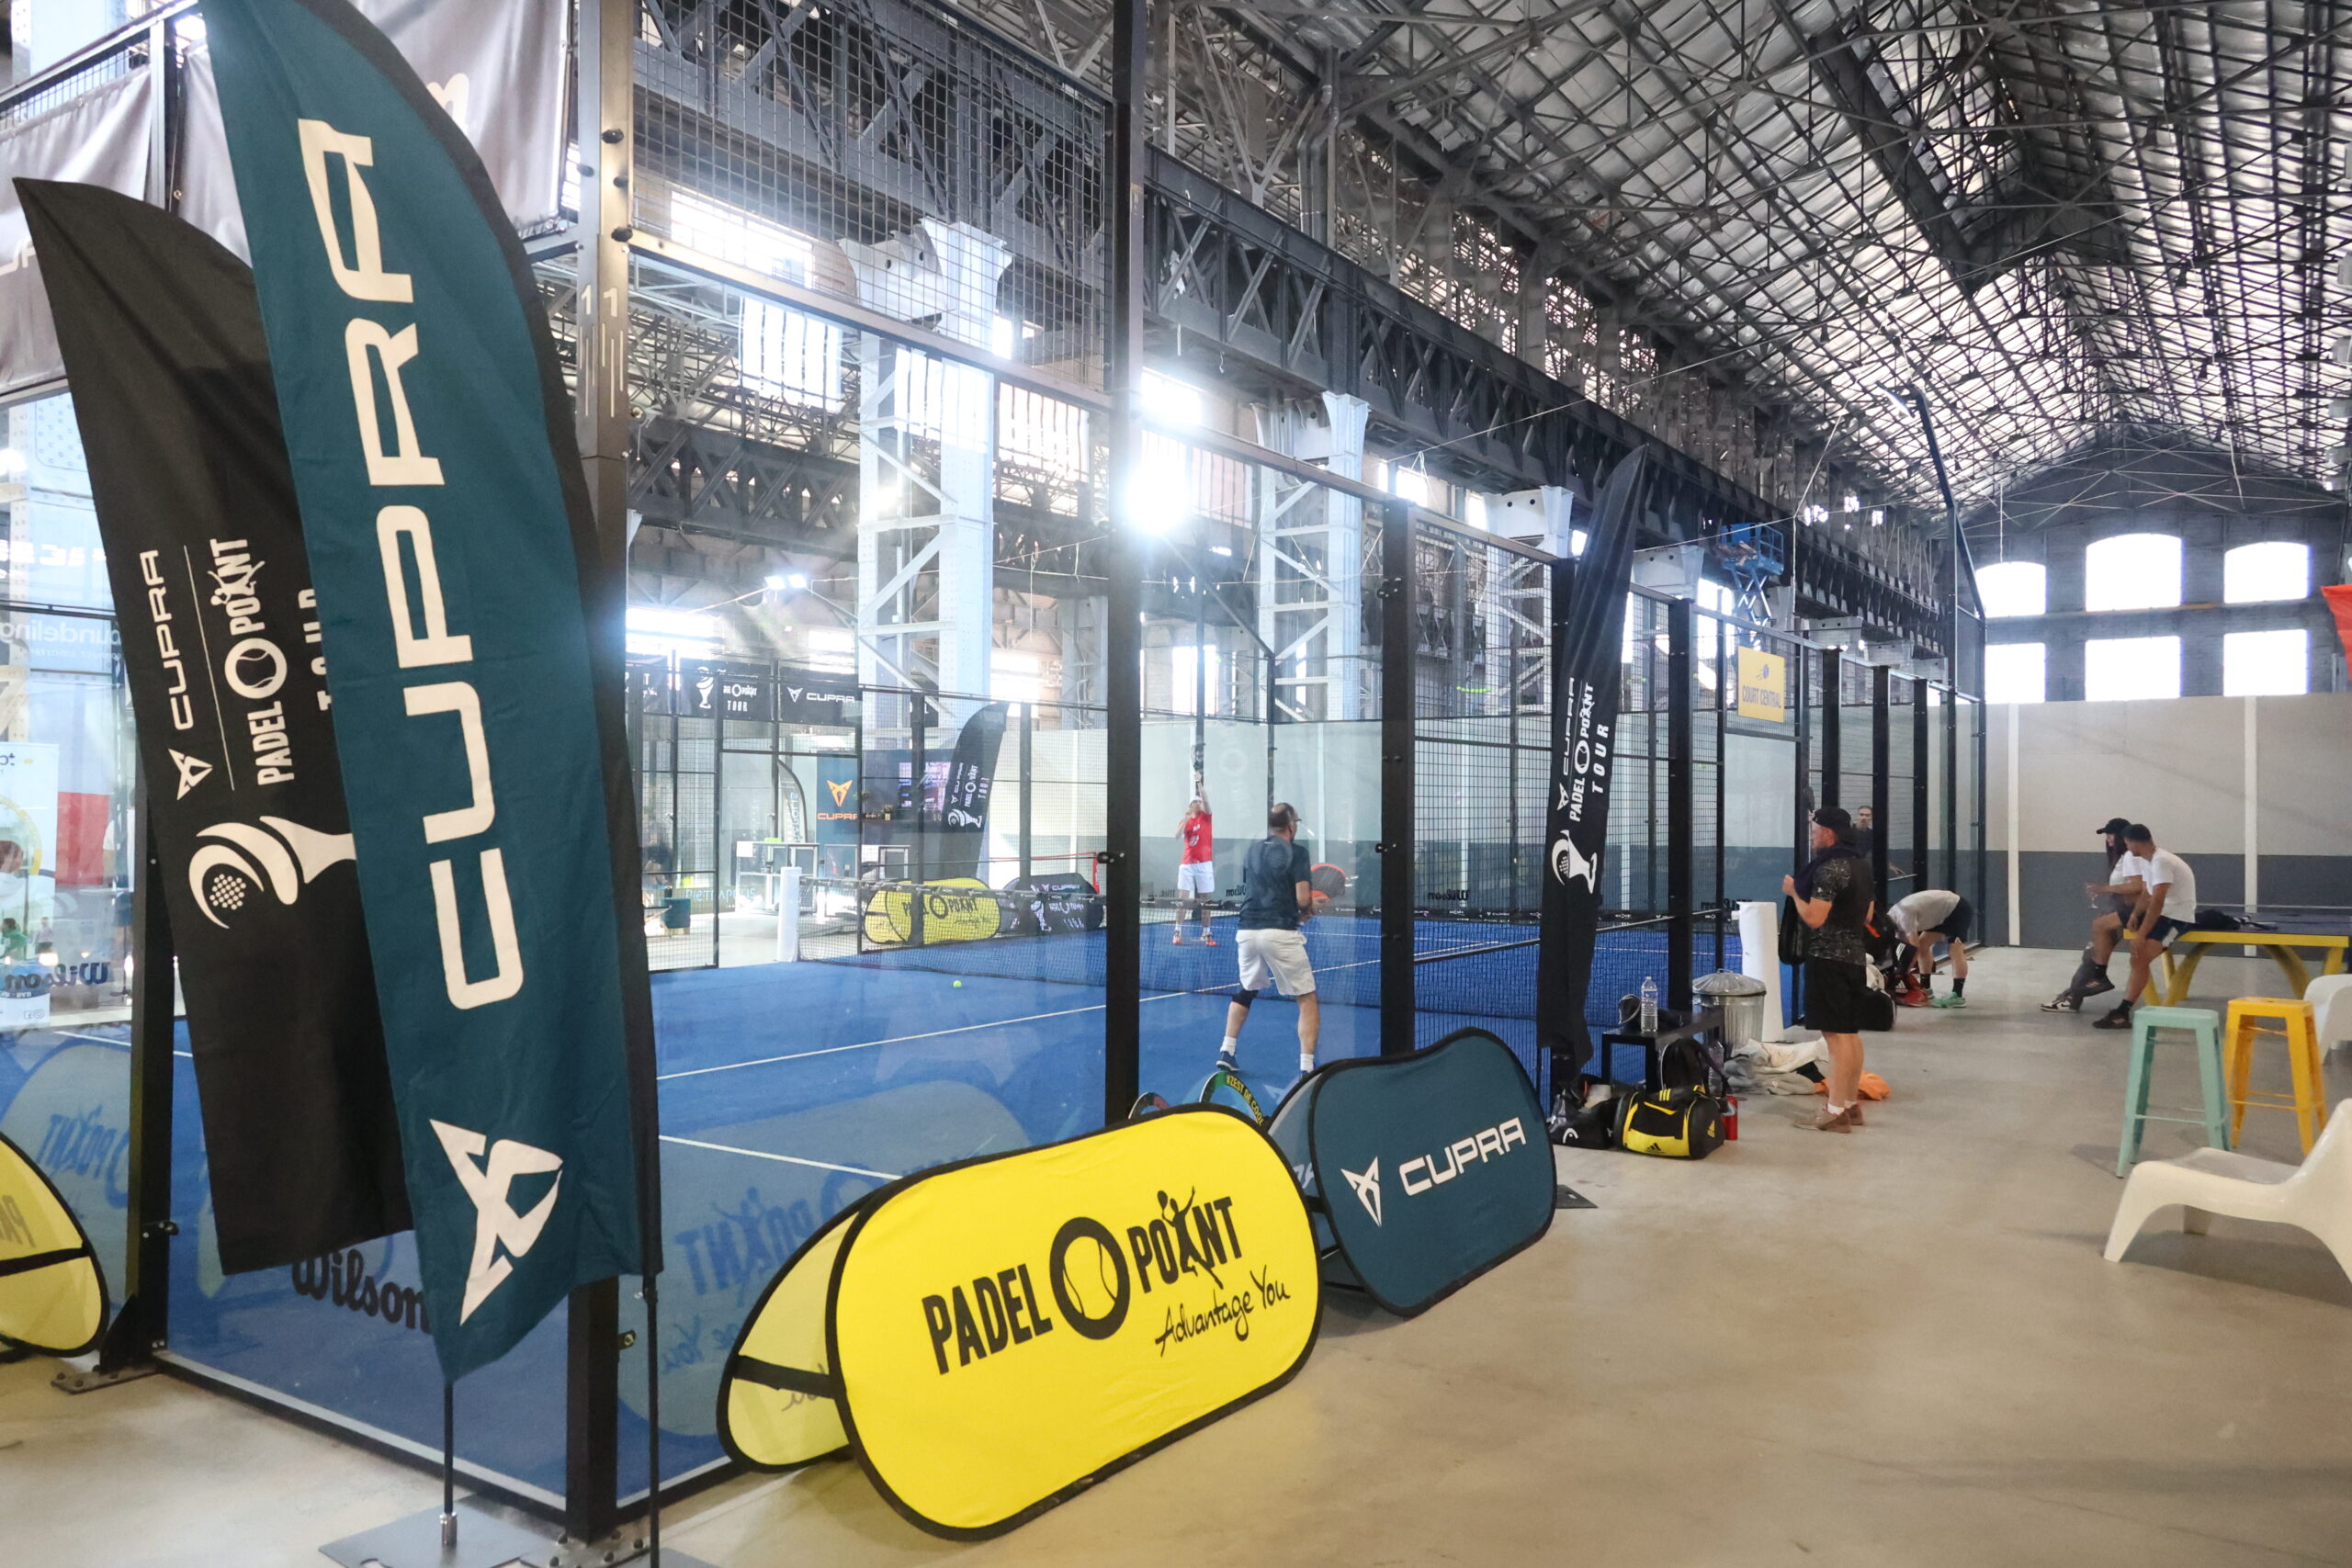 Cupra Padel-Point Tour Saint-Etienne: received 4 out of 4!